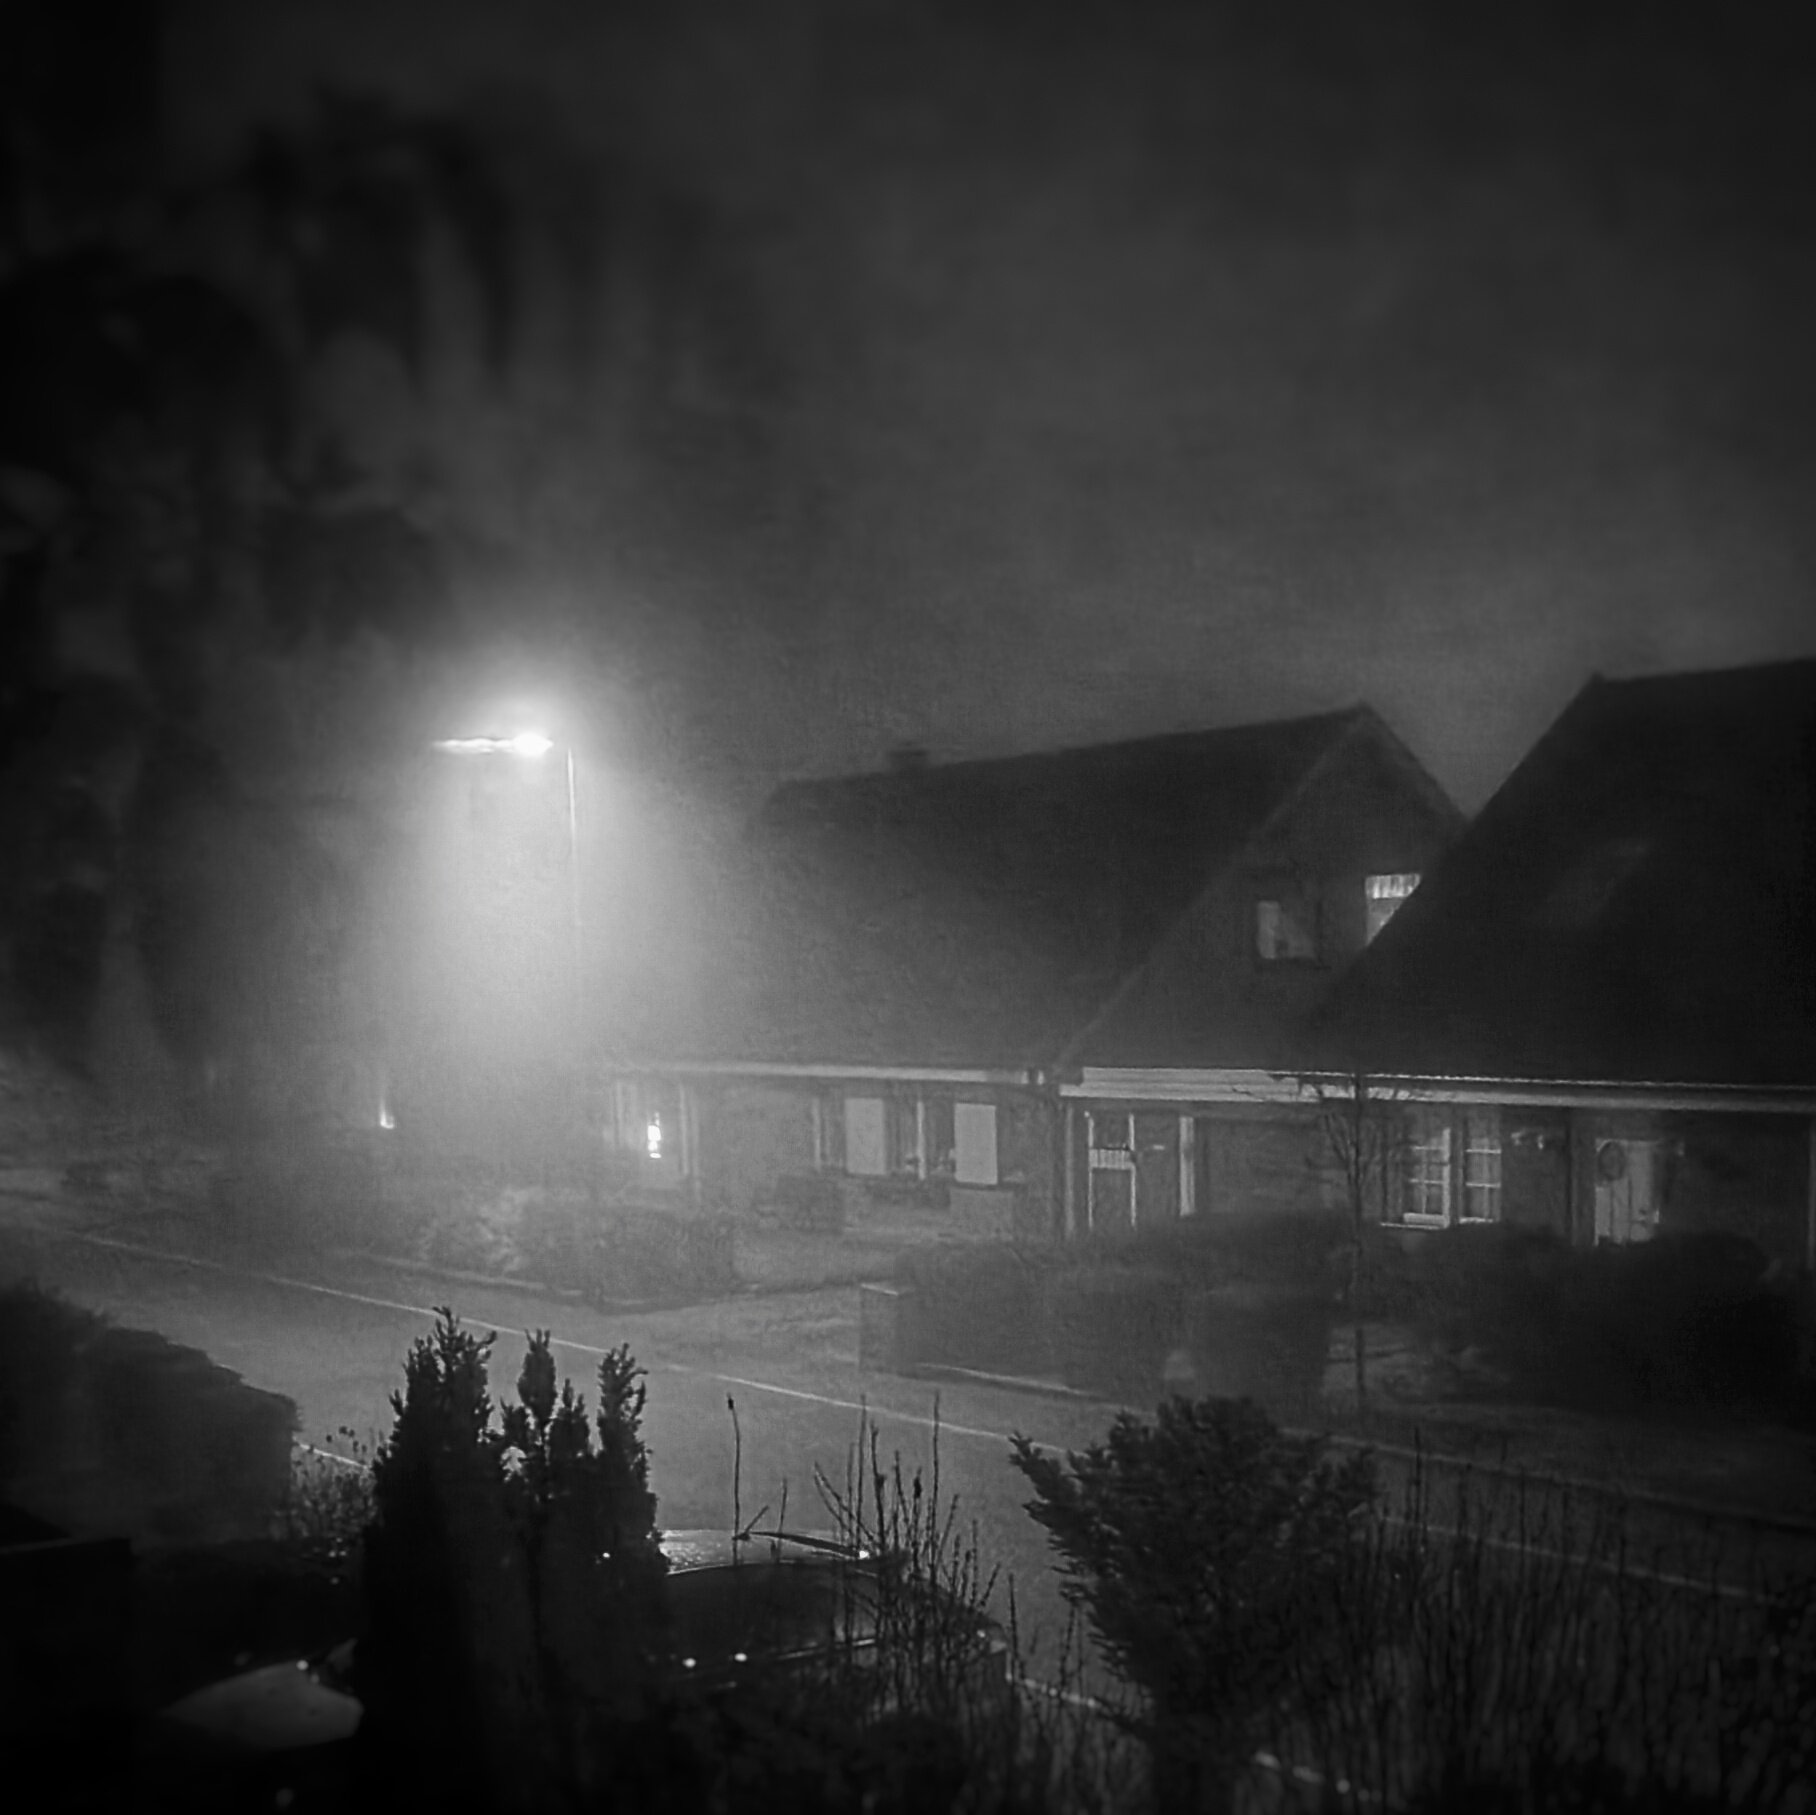 Day 71 - March 12: Night in Foggy Town